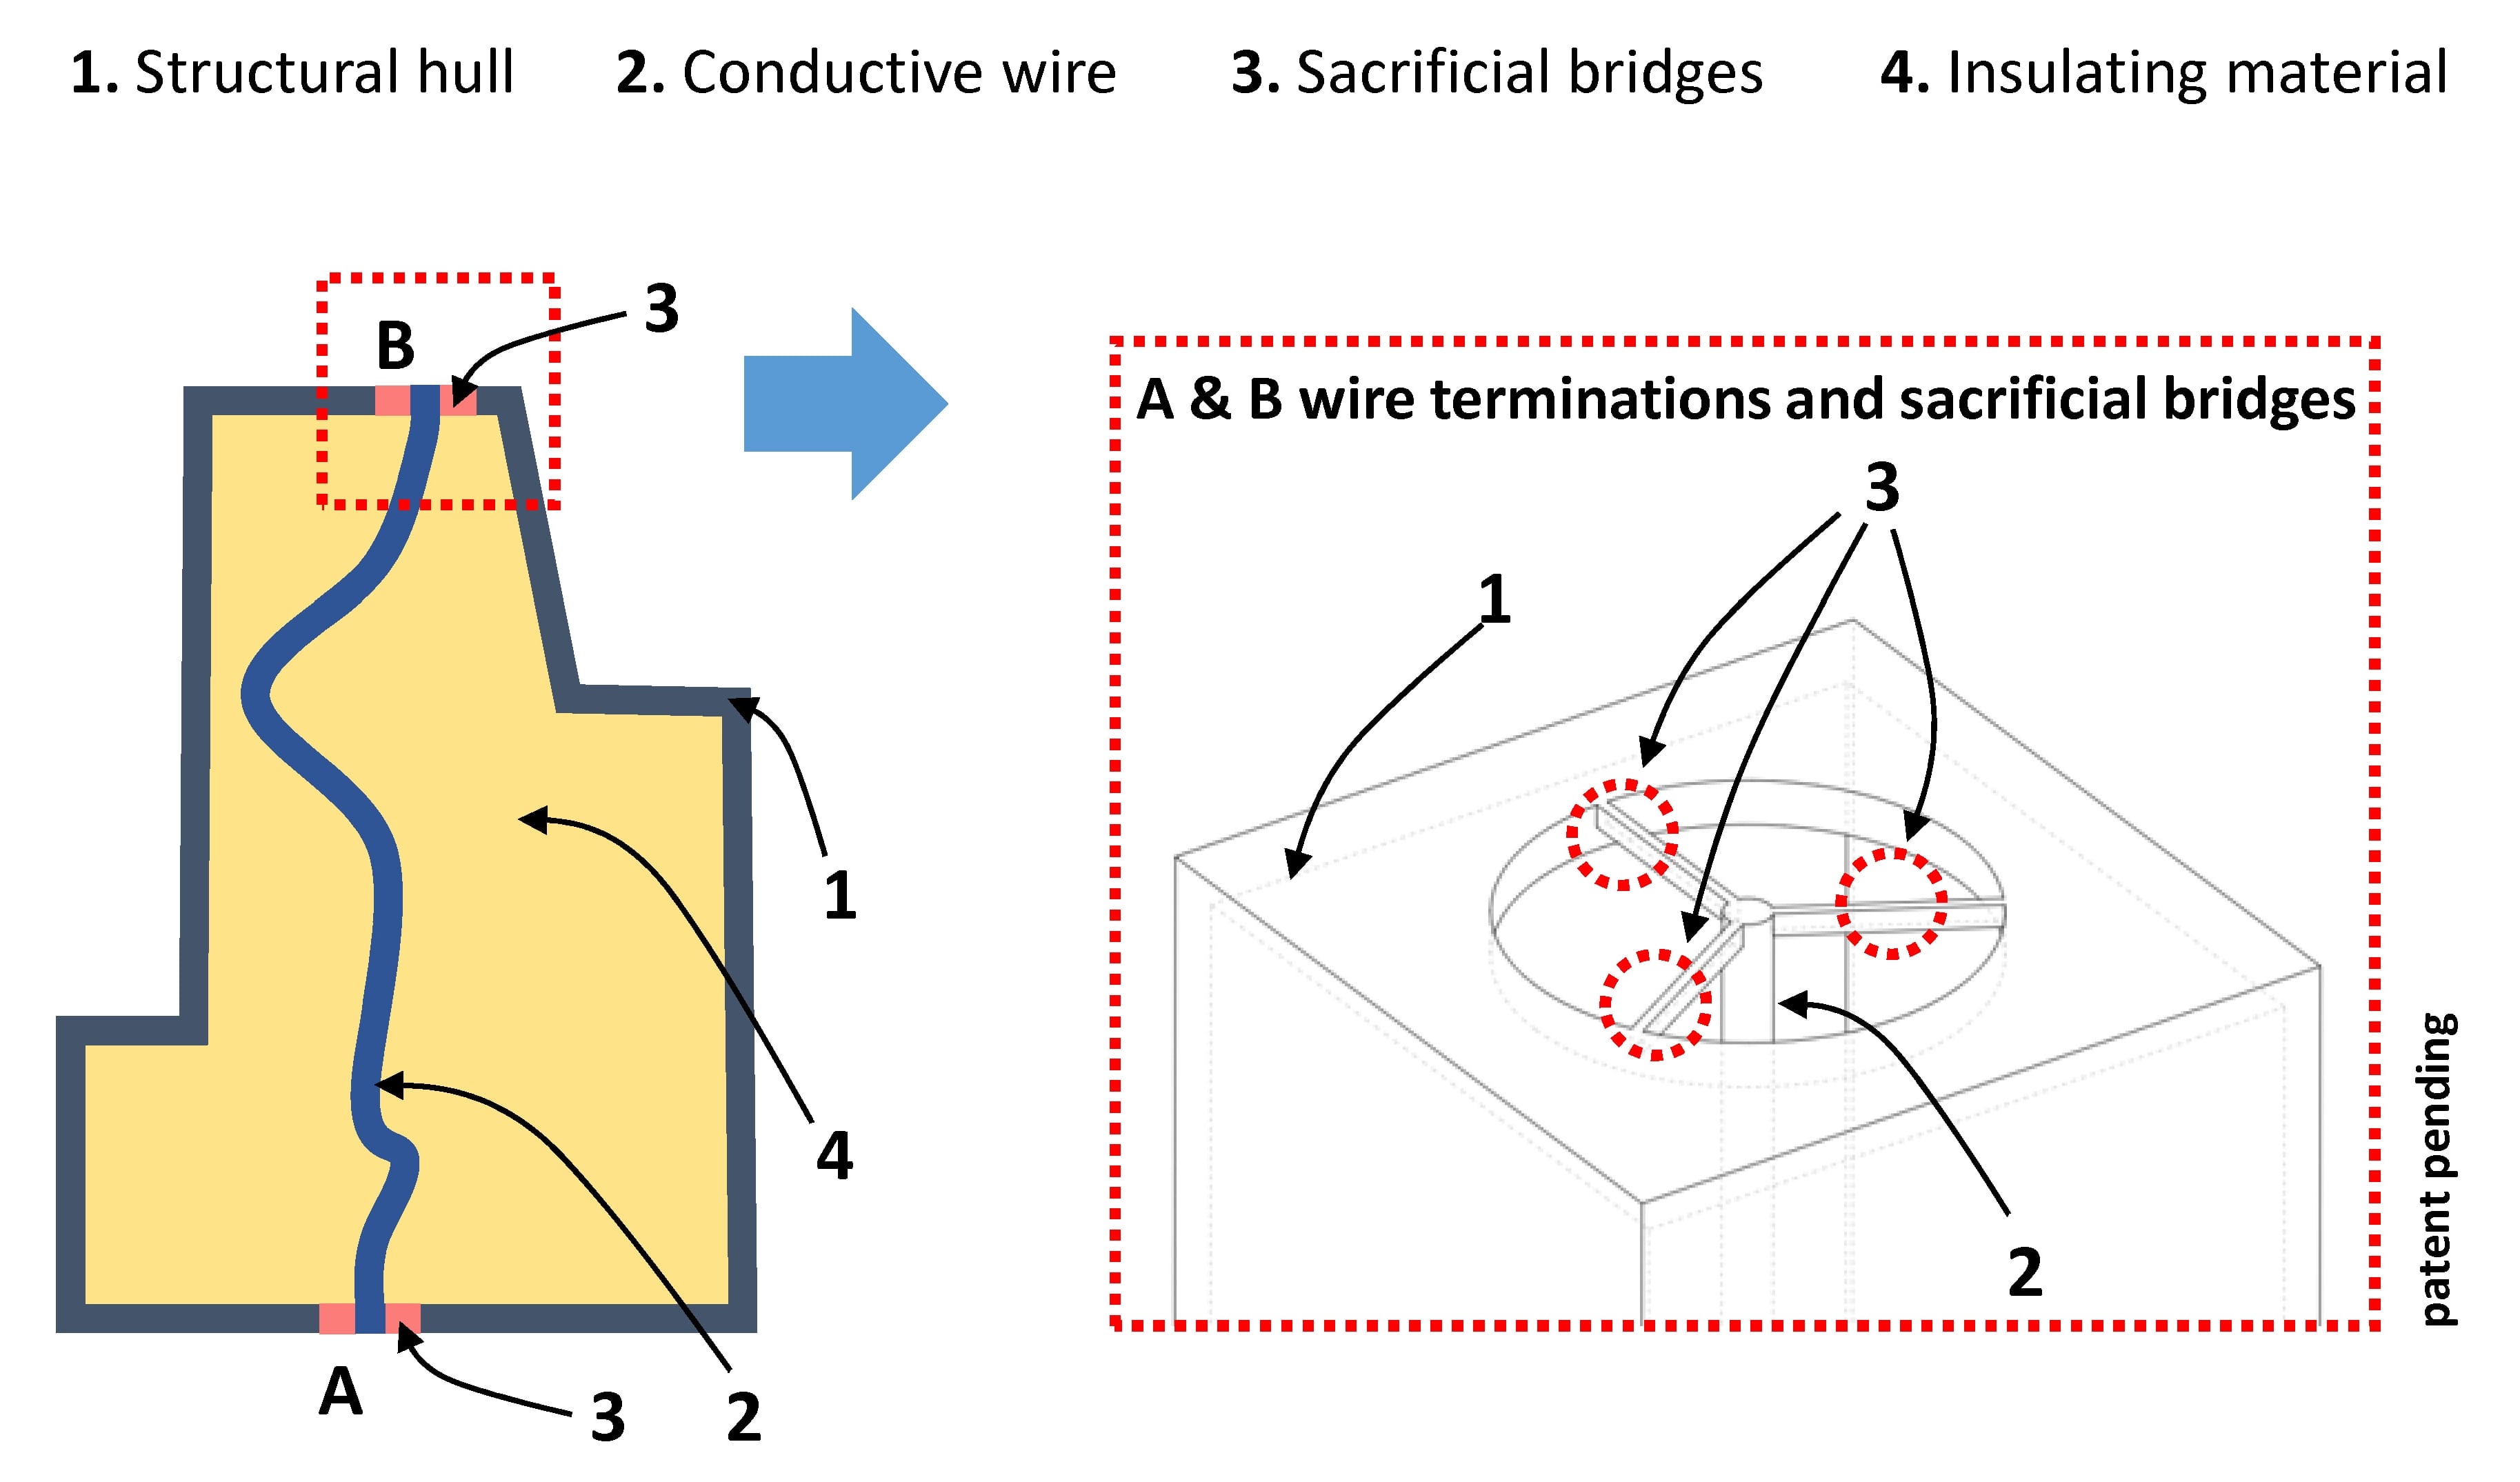 Schematic description of the concept of mechanical parts
featuring built-in electrical wires